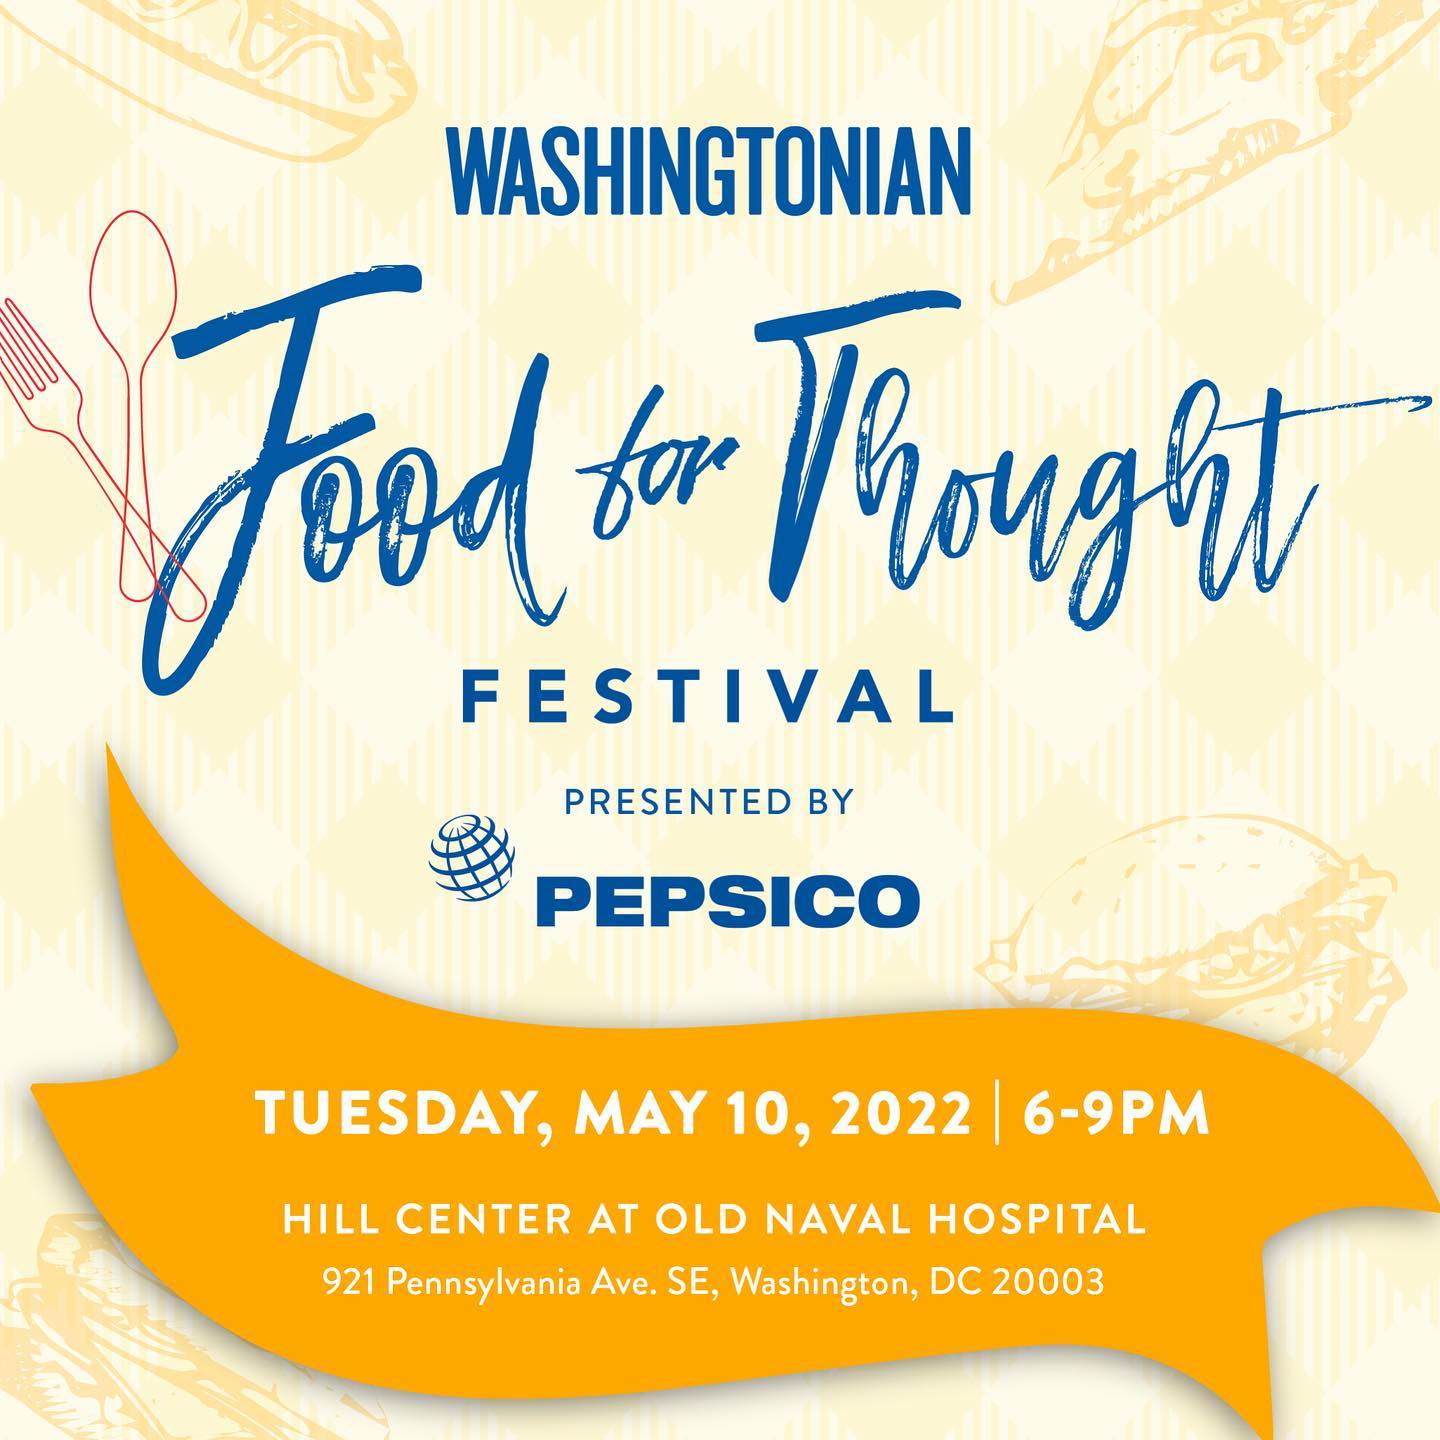 This is a personal invite to join me and taste some of the best bites the DMV has to offer tomorrow May 10, 2022! 

The @washingtonianmag Food for Thought Festival, presented by PepsiCo supports and uplifts Black and Hispanic own hospitality businesses! 

What more do you need? Tickets? Tap the link in my bio to get 15% off using CODE: FoodForThought and join me! @washingtonianevents 
°°°
#washingtondcfood #washingtonian #dcfoodblogger #dcfoodie #dcfoodevents #capitolhilldc #hillcenterdc #blackbusiness #hispanicbusiness #dmvfood #dmvfoodblogger